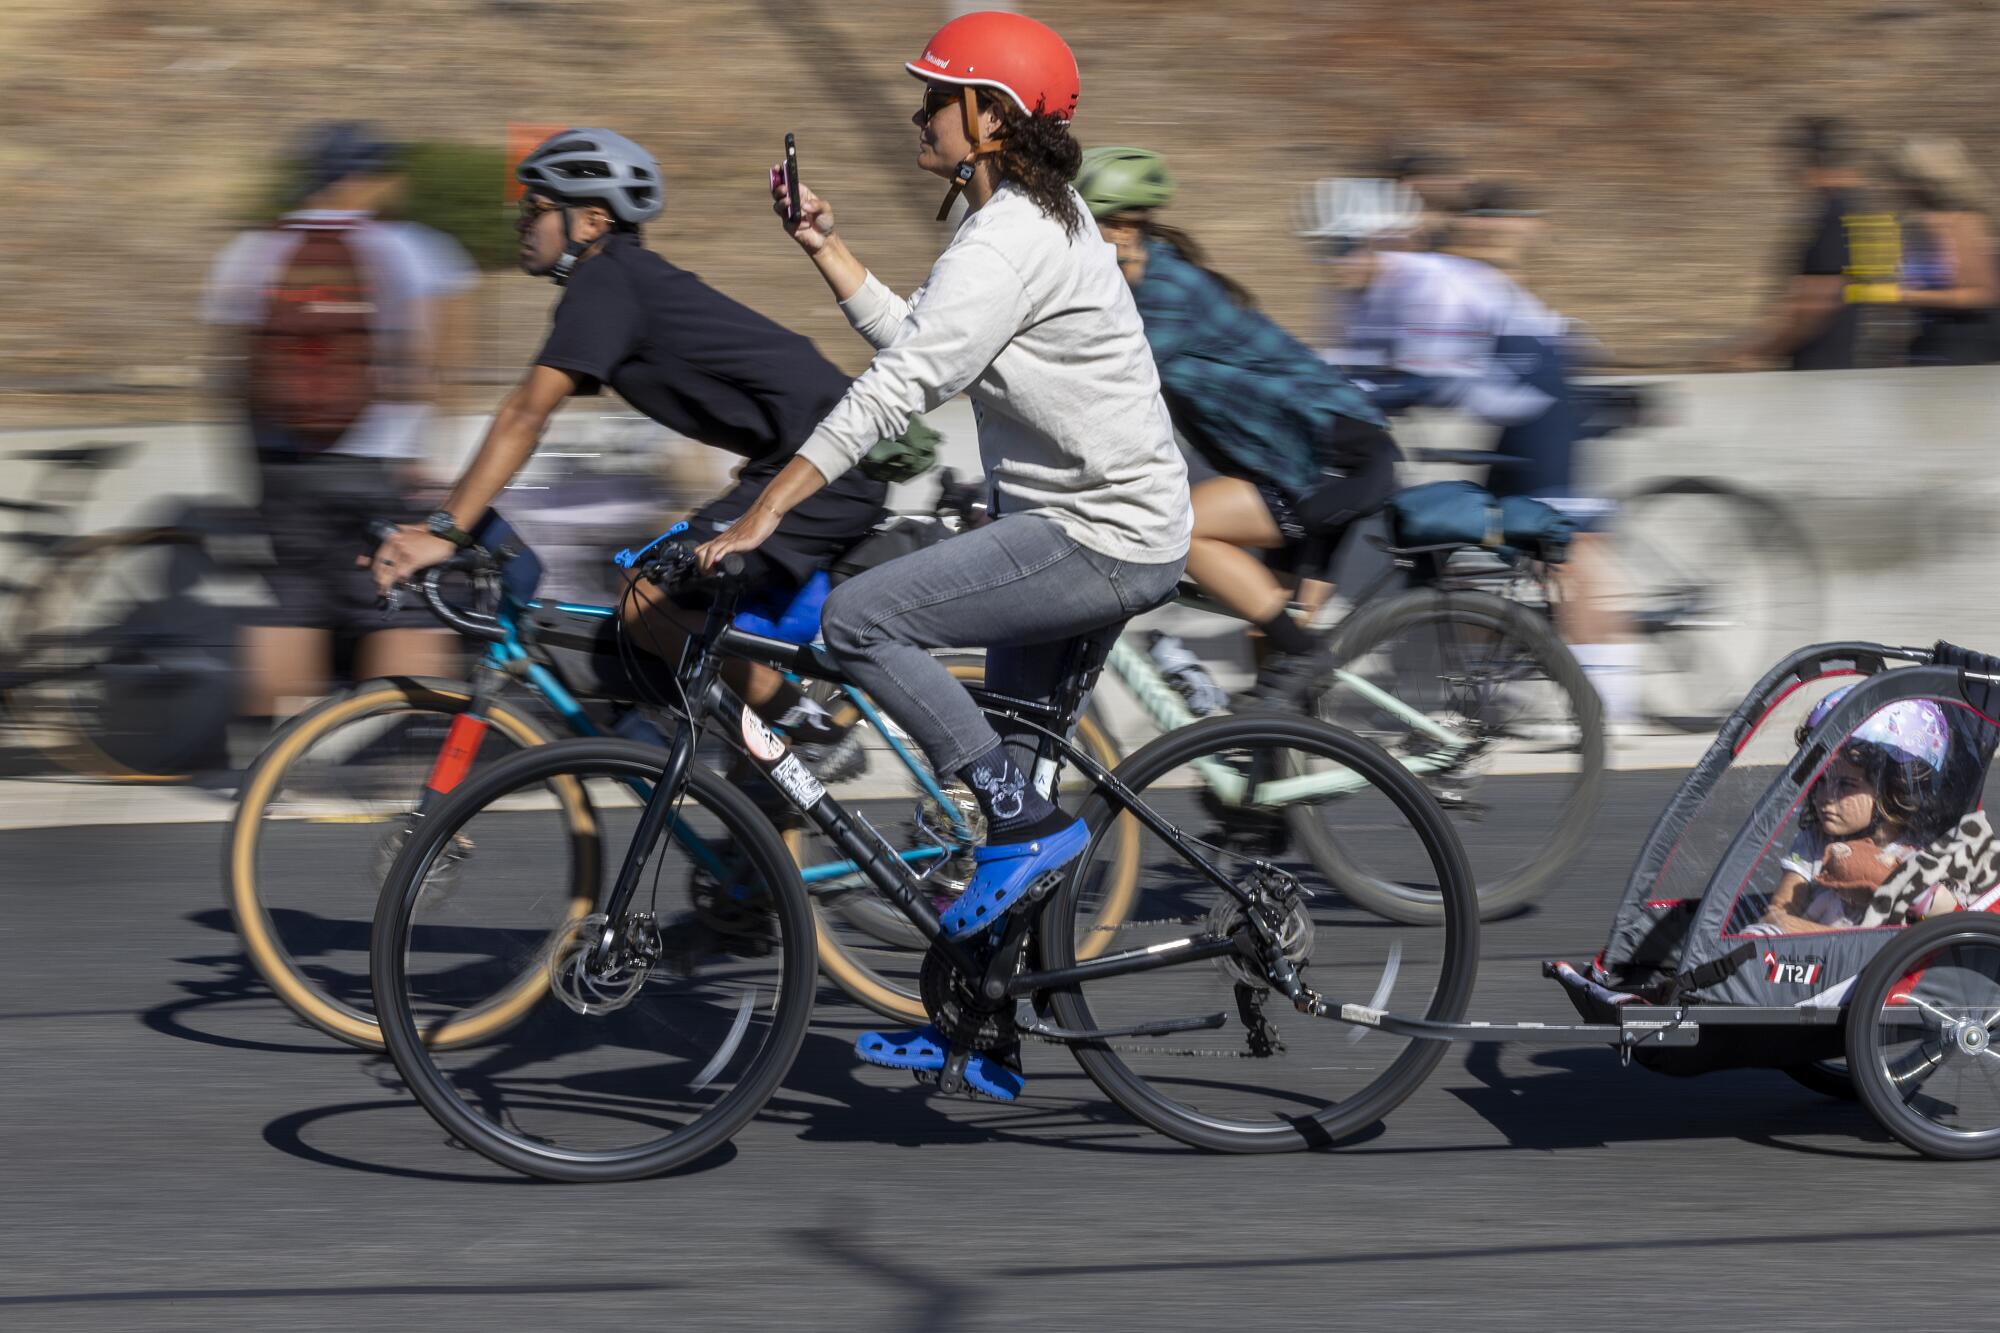 Thousands of bicyclists, rollerbladers, skateboarders, walkers and runners enjoy the Arroyo Seco Parkway during ArroyoFest.